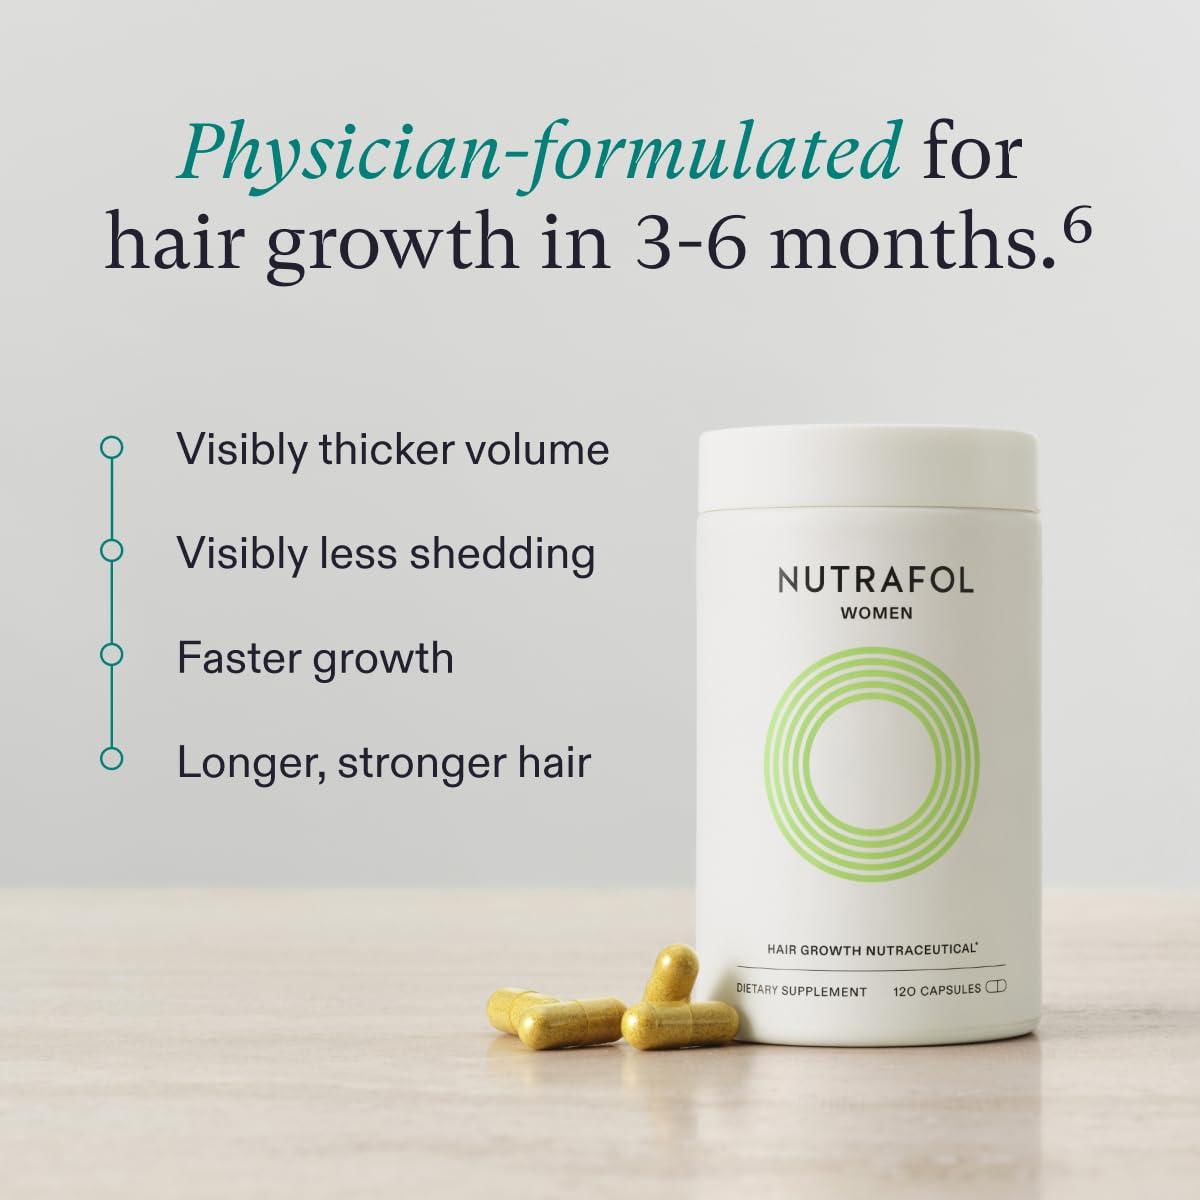 Nutrafol Women&#39;s Hair Growth Supplements, Ages 18-44, Clinically Proven for Visibly Thicker and Stronger Hair, Dermatologist Recommended - 1 Month Supply